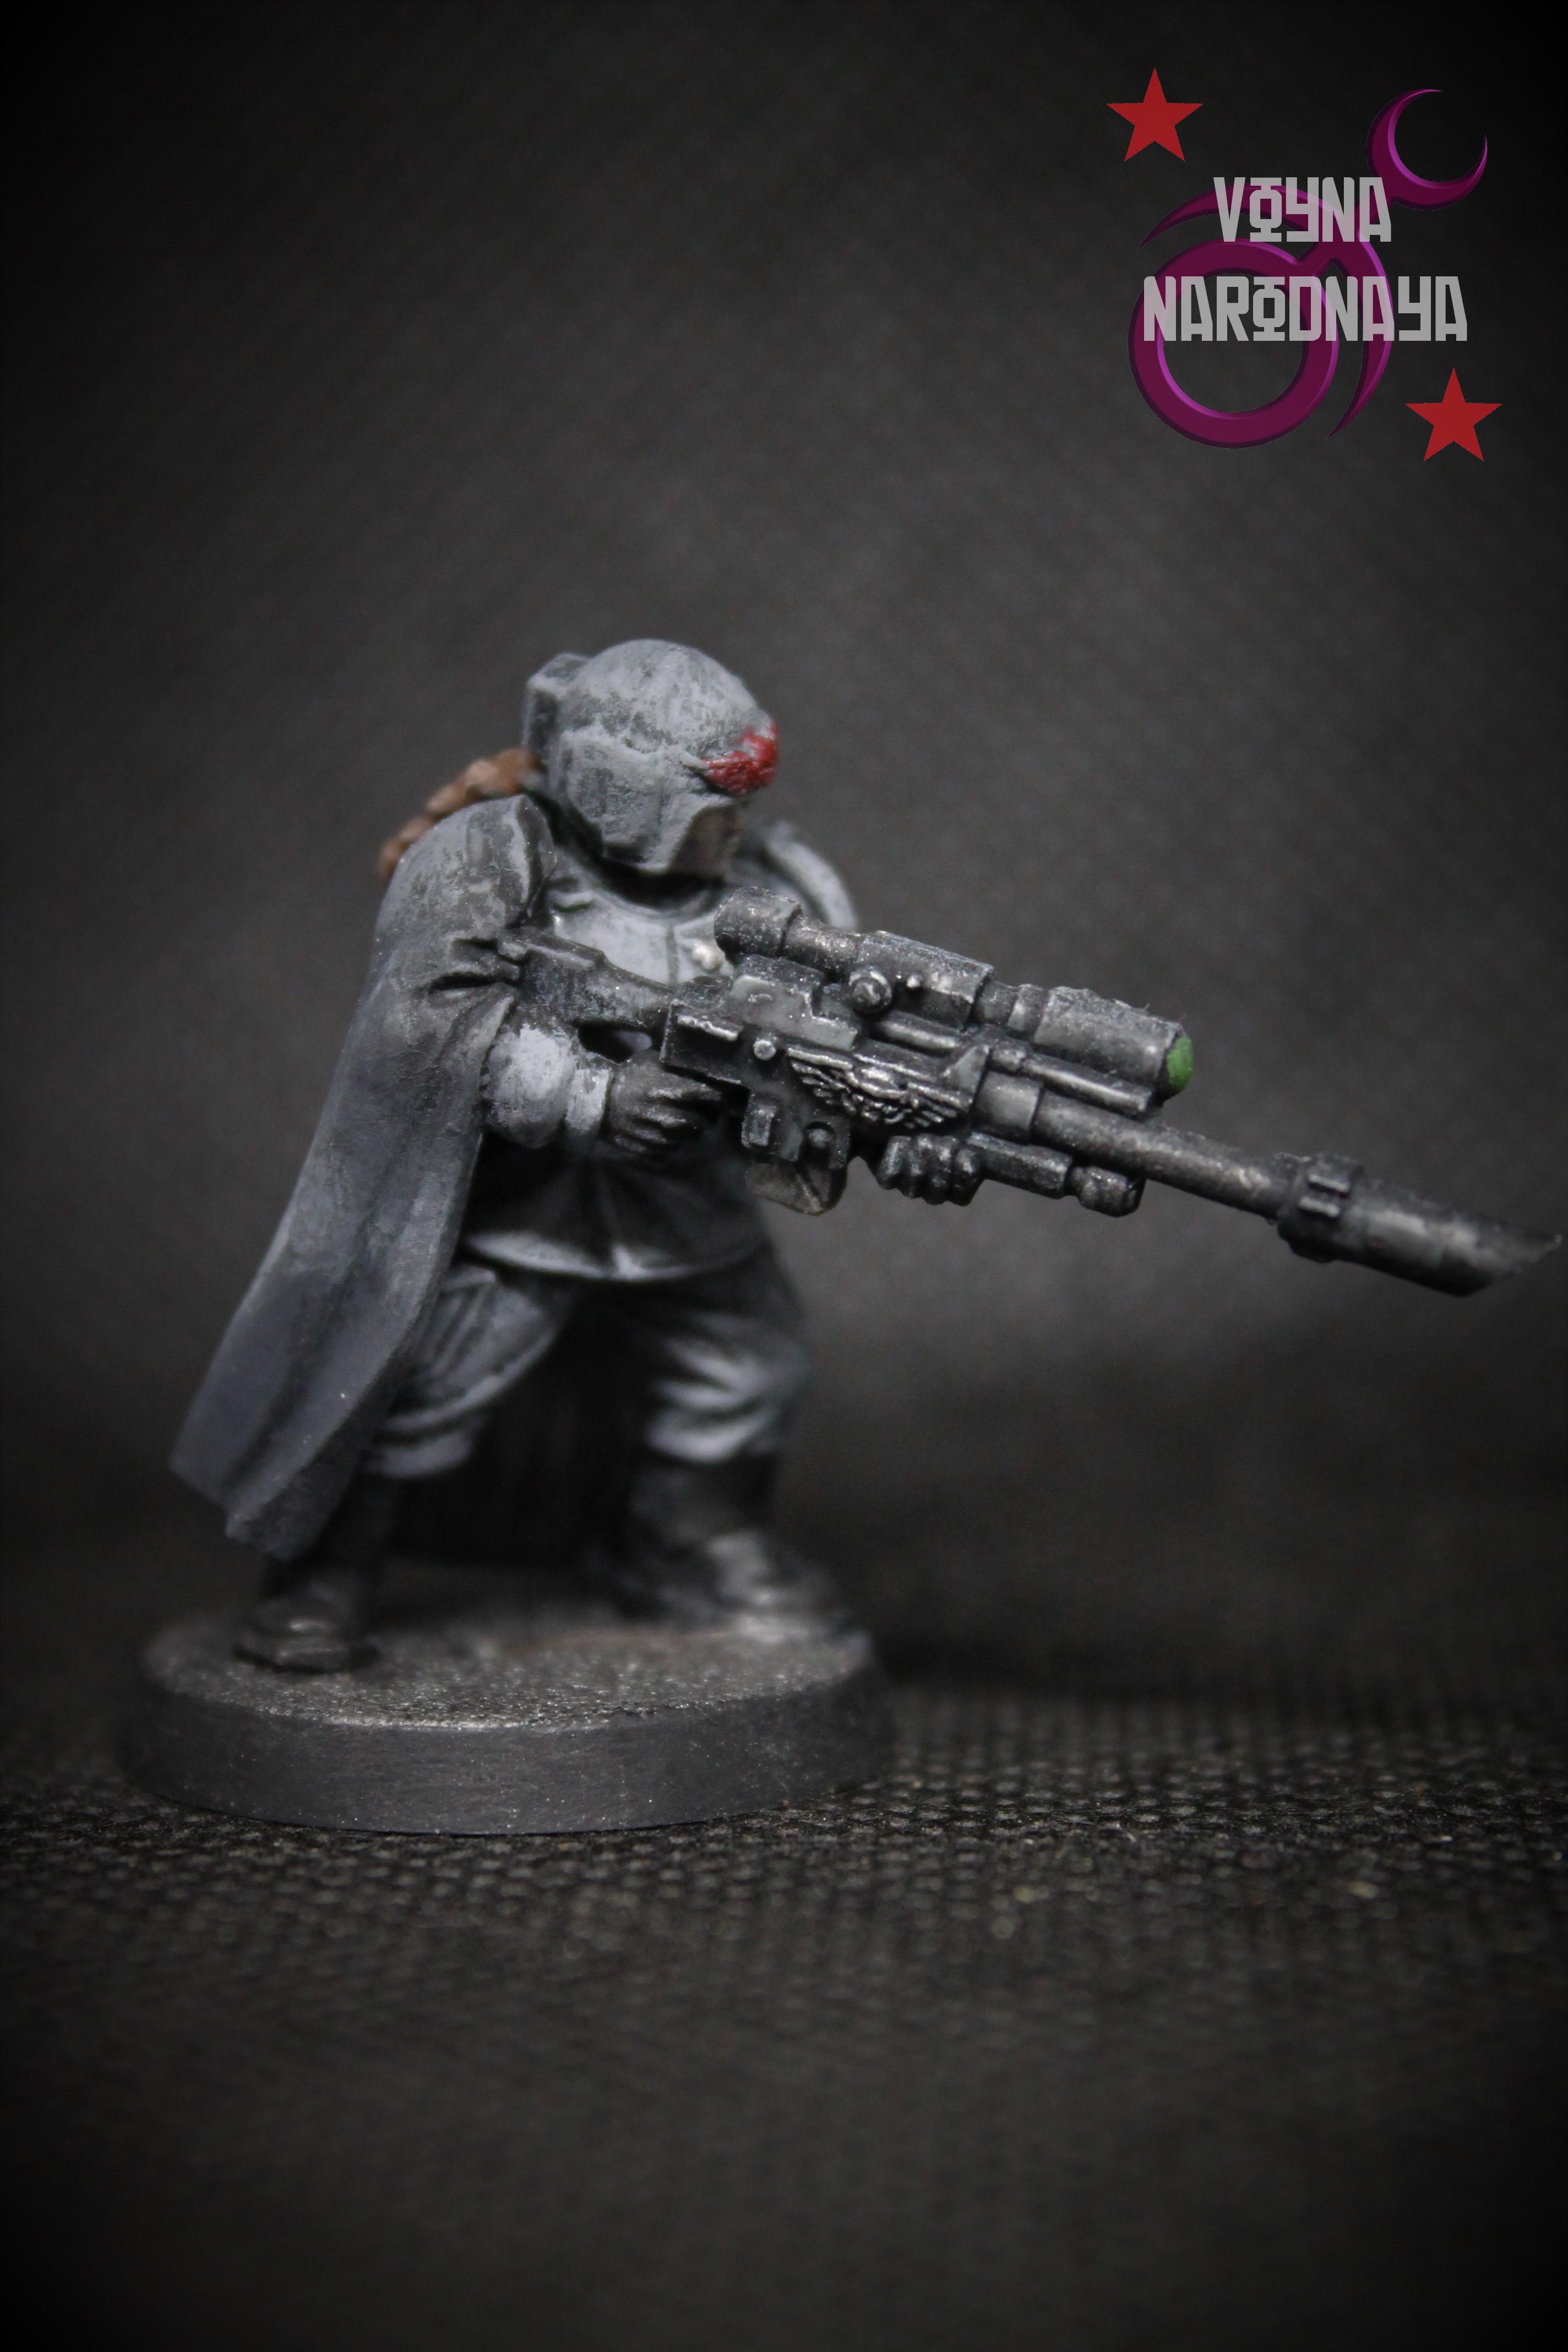 Assassin, Astra Militarum, Cadian Shock Troops, Cadians, Eastern Front, Female, Guard, Heretics, Imperial, Imperial Guard, Kronstadt, Kukushka, Militia, Planetary Defence Force, Red Army, Renegades, Renegades And Heretics, Snipers, Vindicare